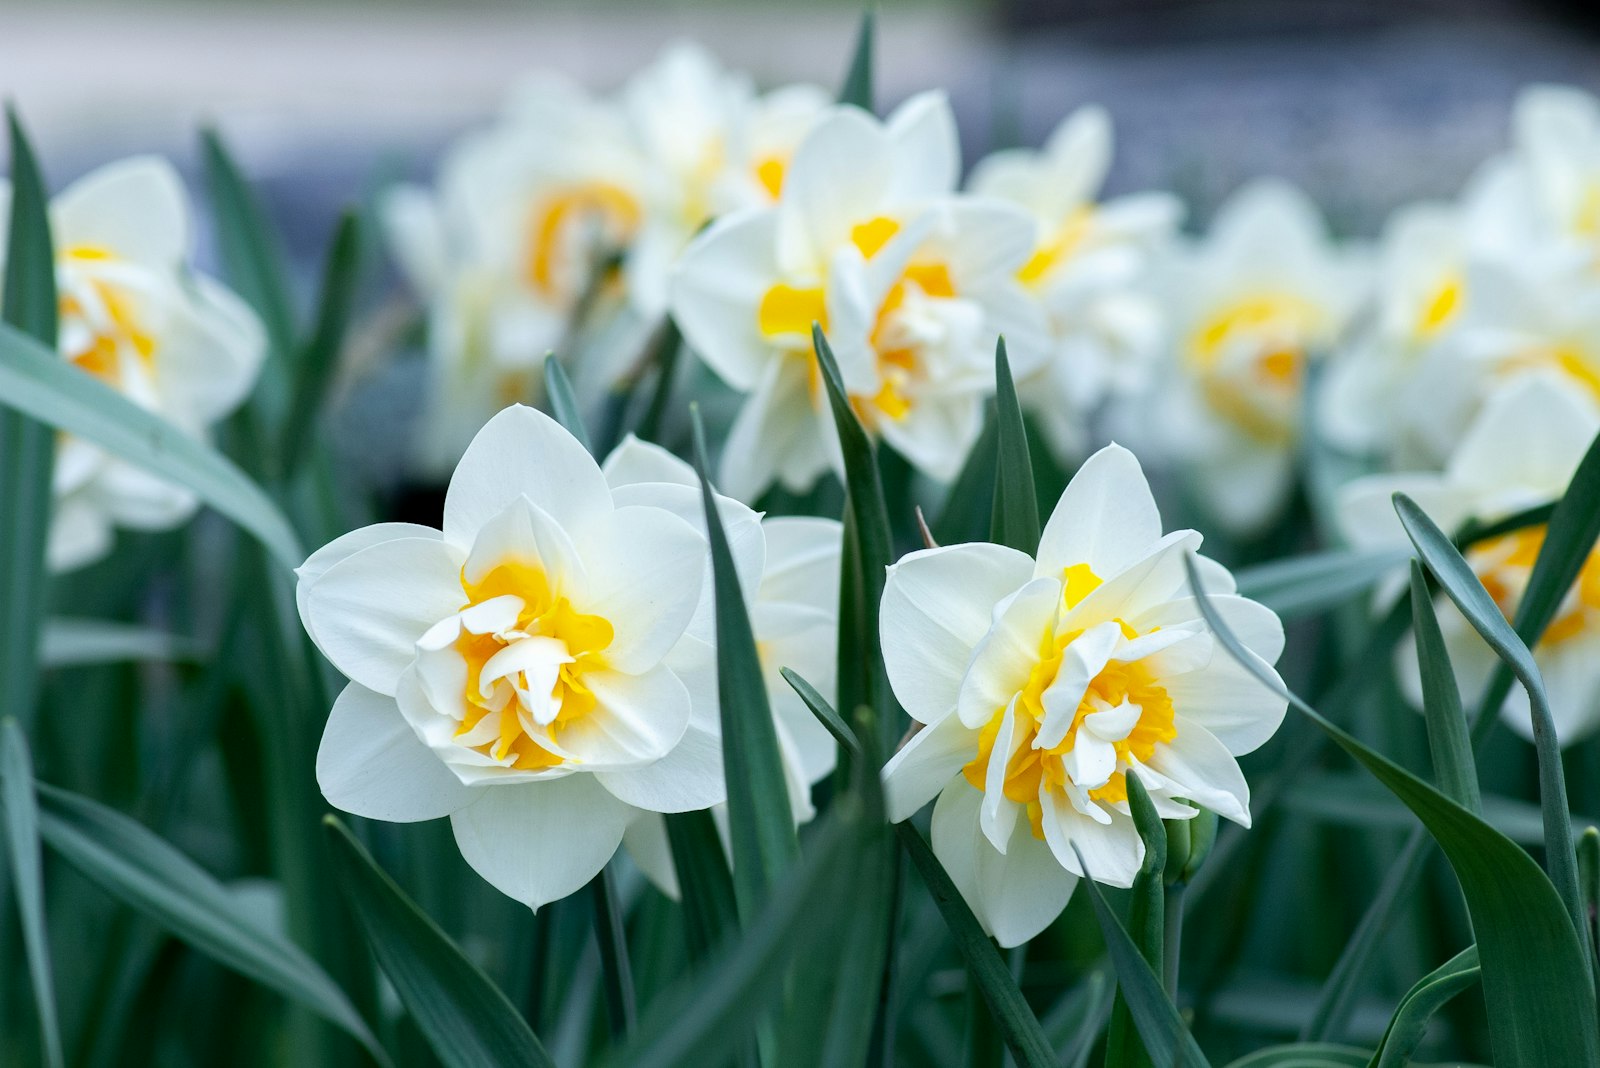 Pentax K100D Super sample photo. White and yellow daffodils photography